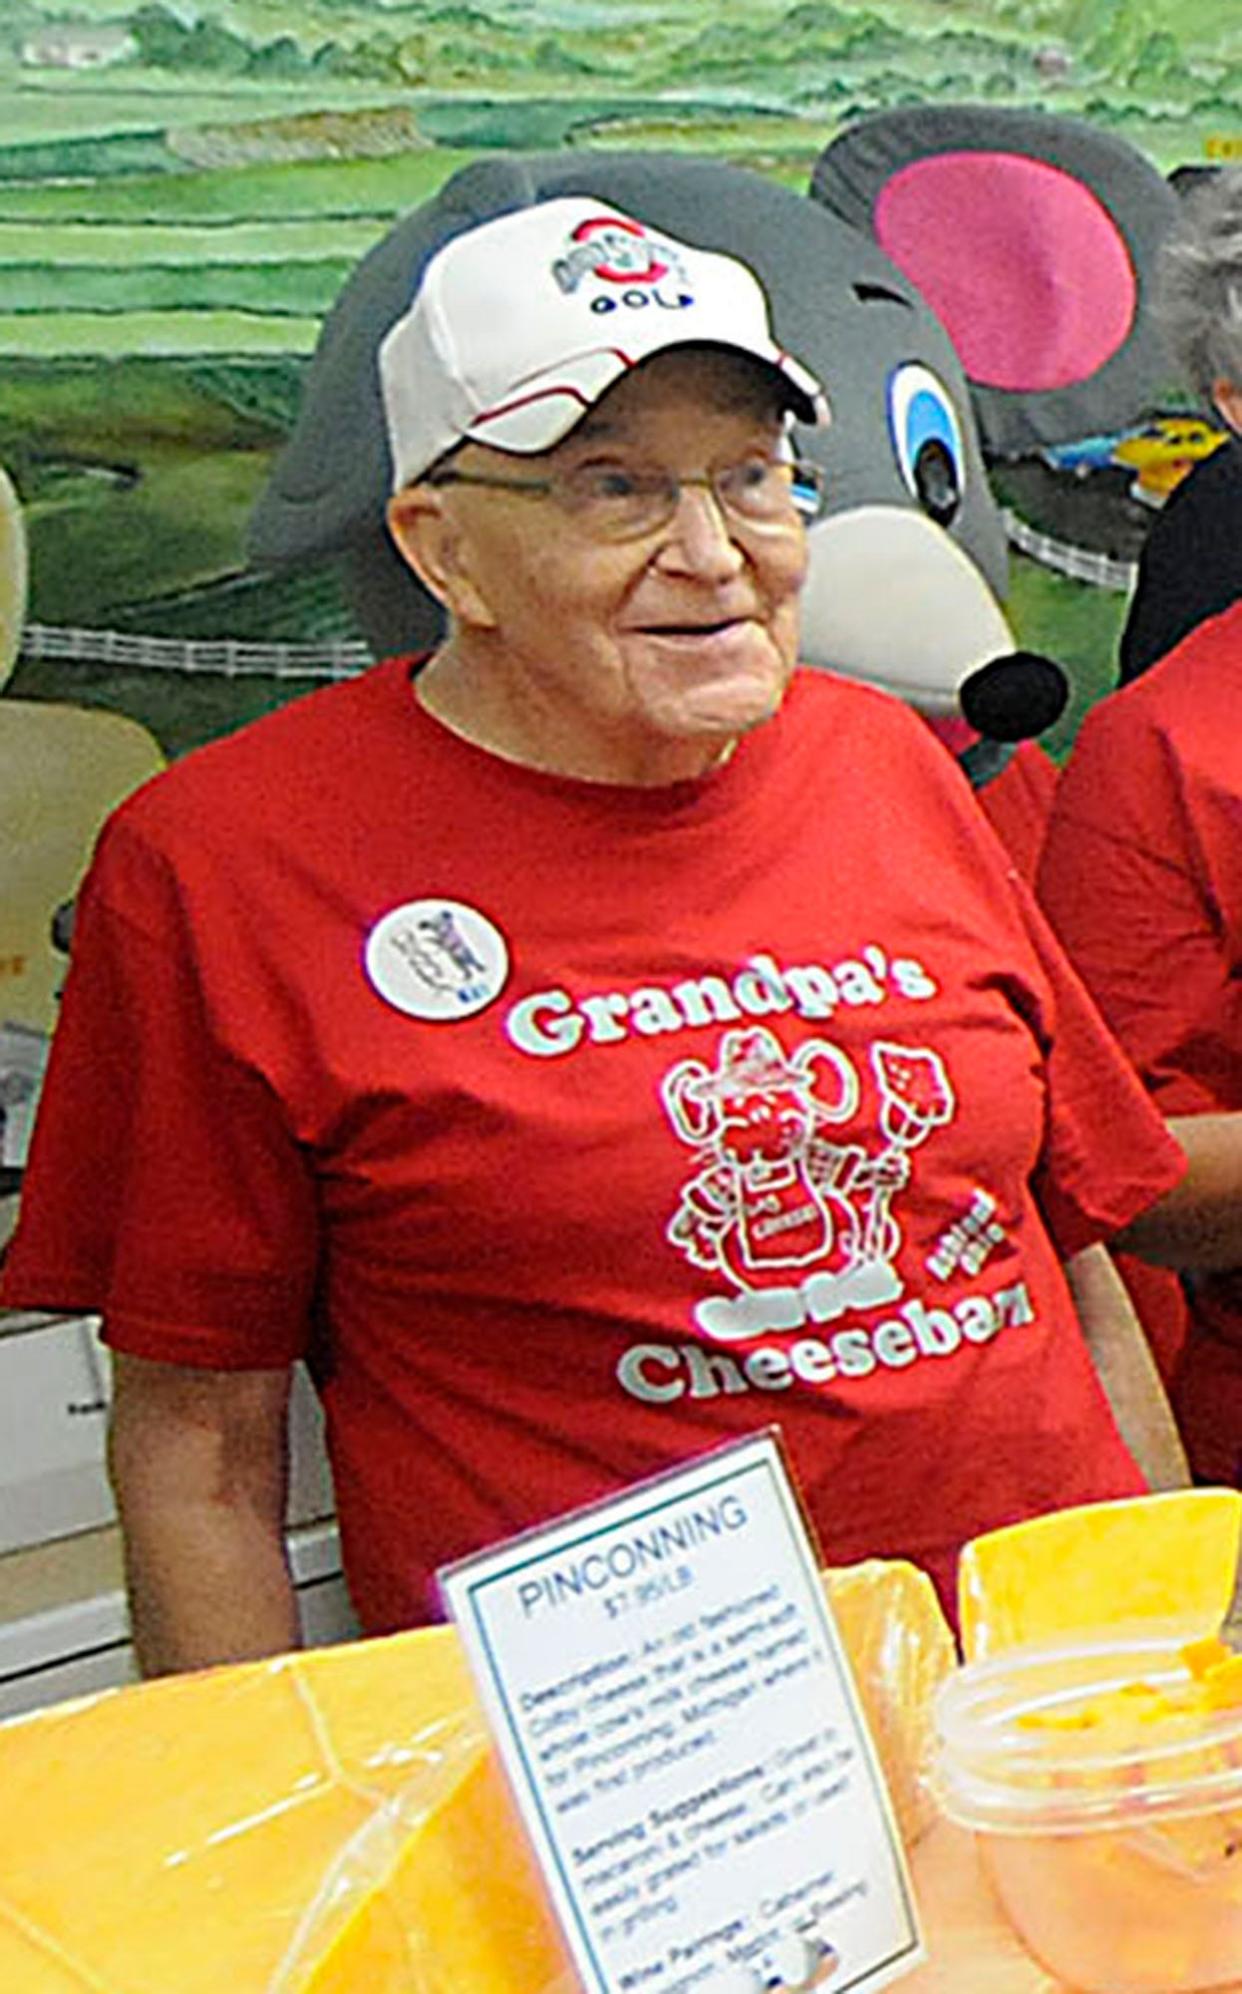 "Grandpa" Dick Baum is seen behind the cheese counter of Grandpa's Cheese Barn in June 2013.